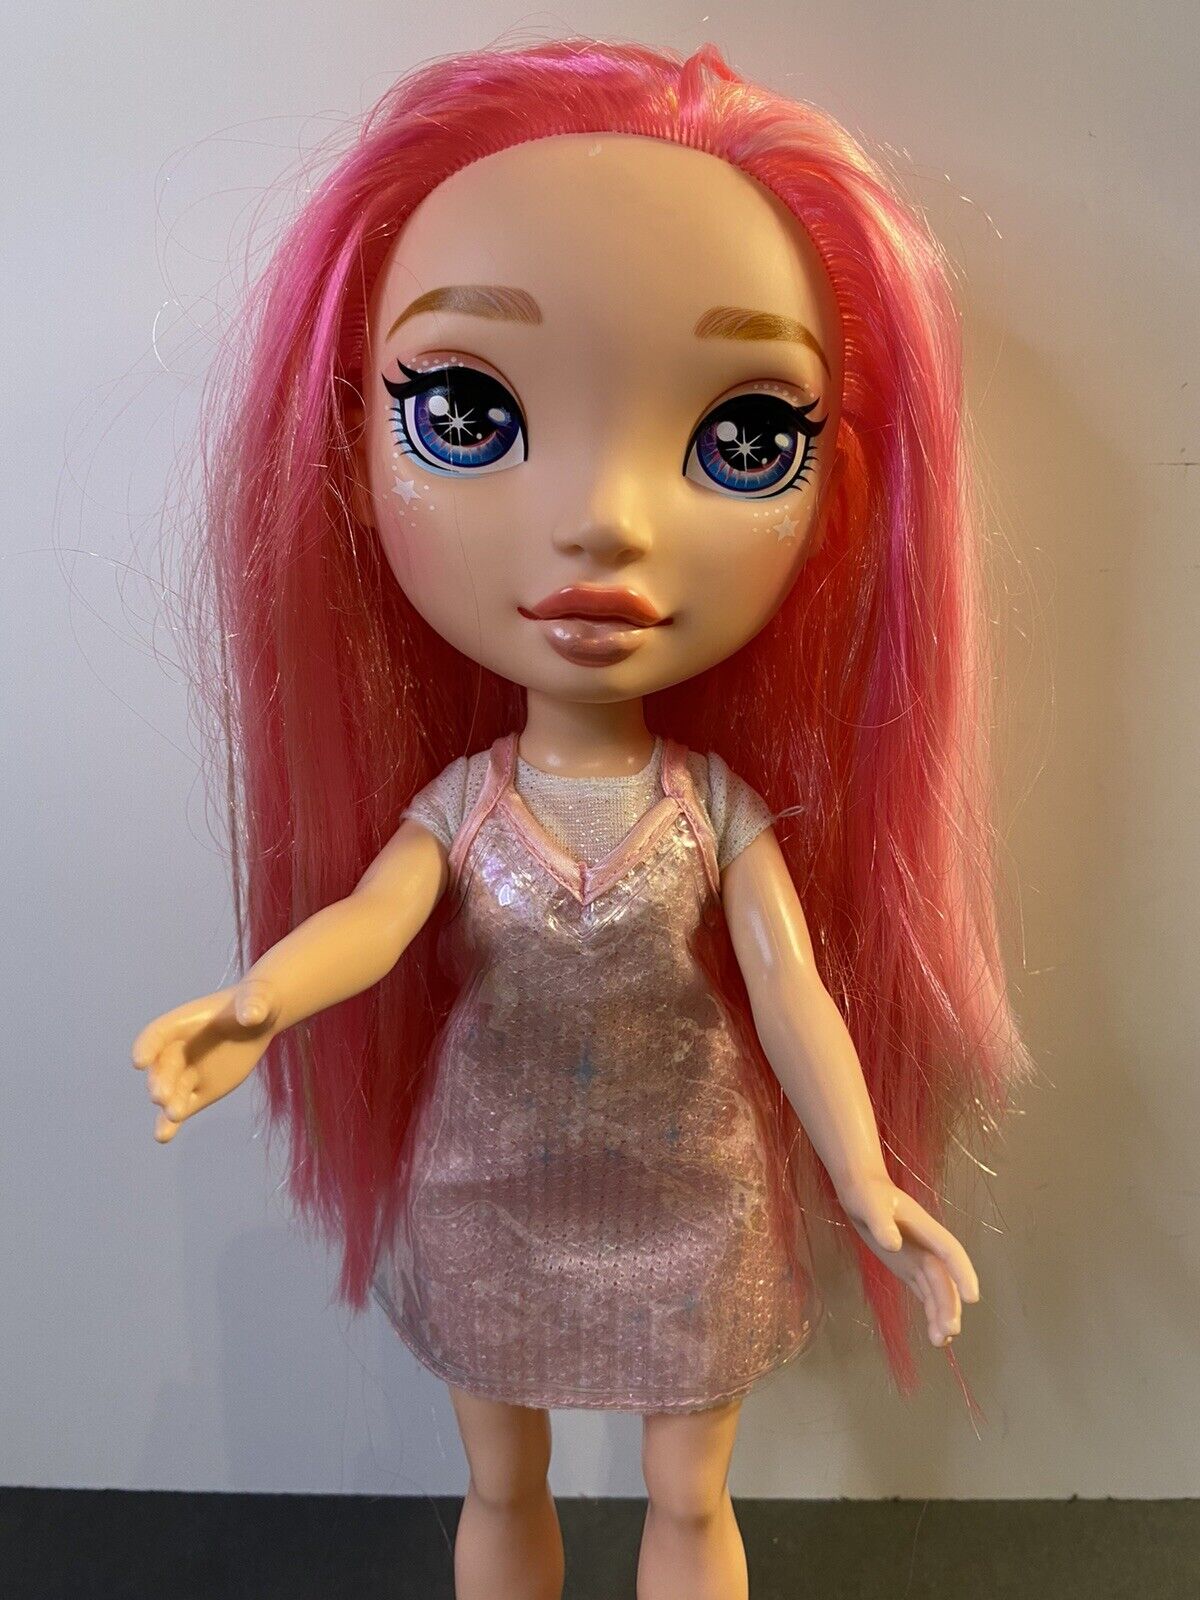 2019 MGA Rainbow High Surprise Pixie Rose Doll With Rollerskates 15” Pink Hair